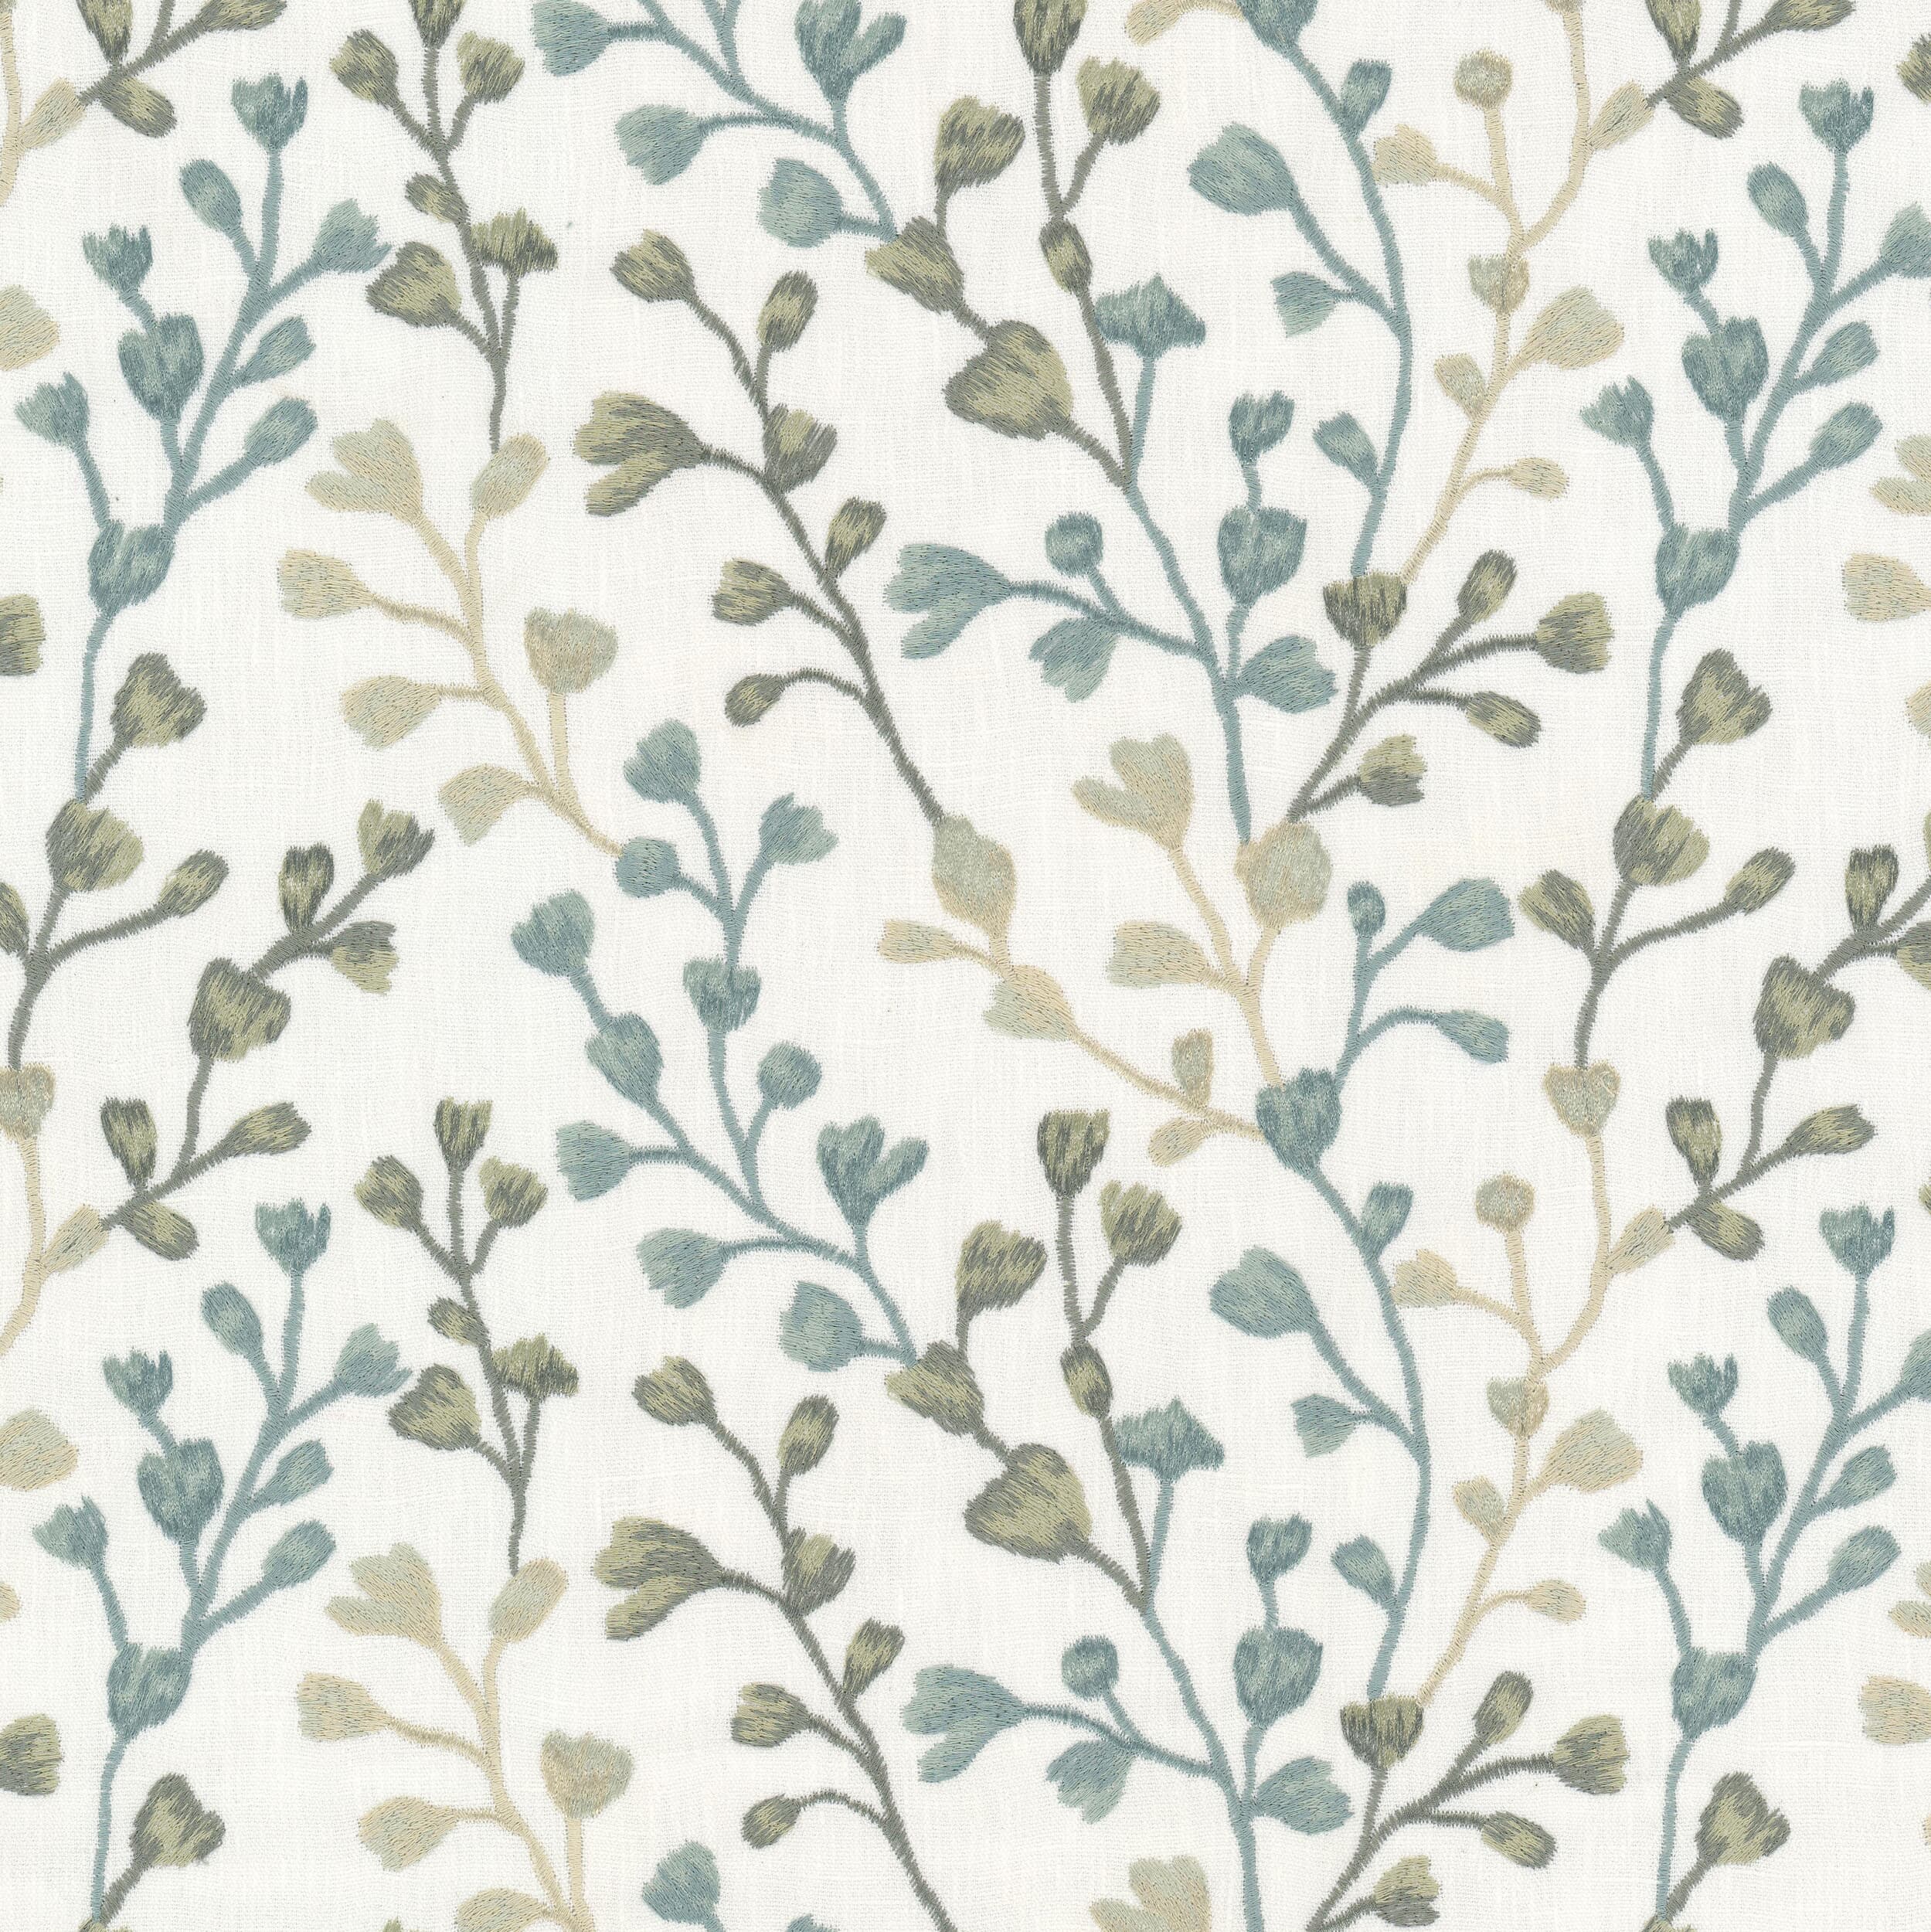 Stumble 1 Seaglass by Stout Fabric